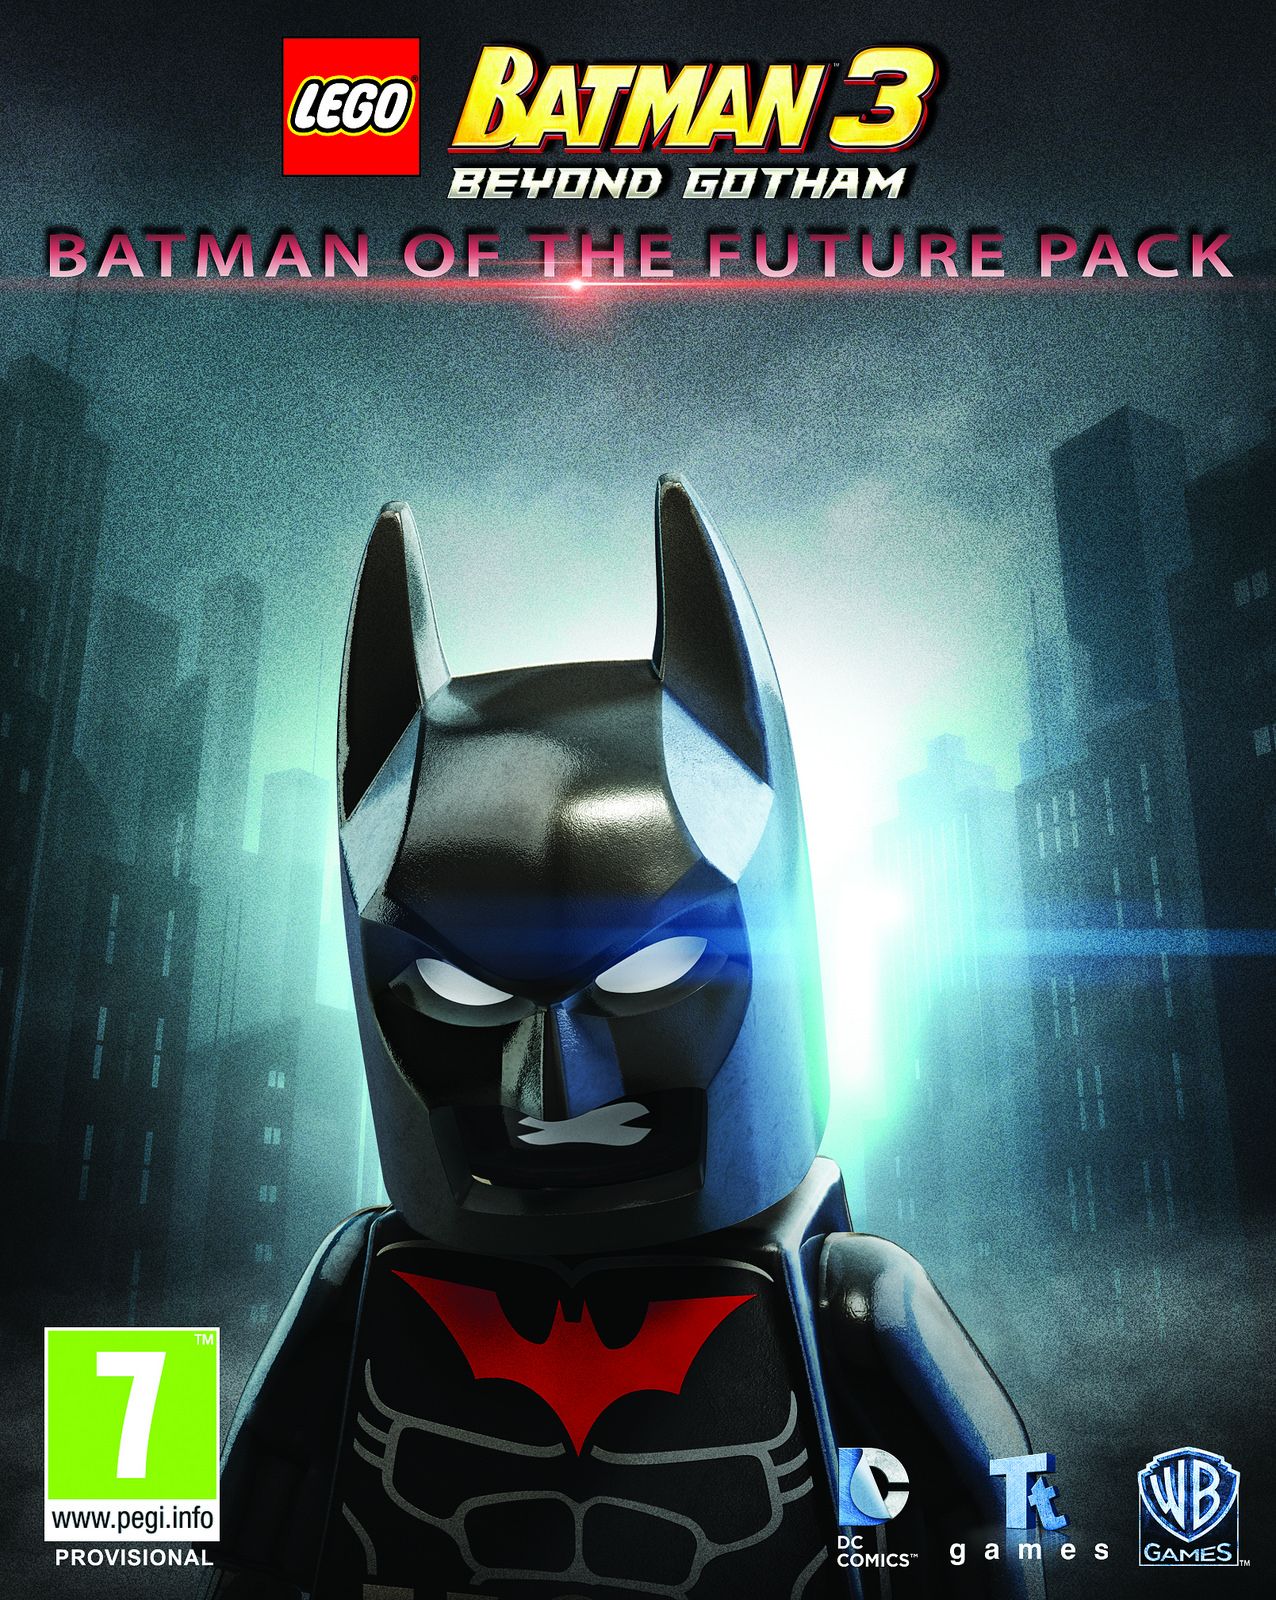 Once the LEGO Batman 3: Beyond Gotham video game was announced for